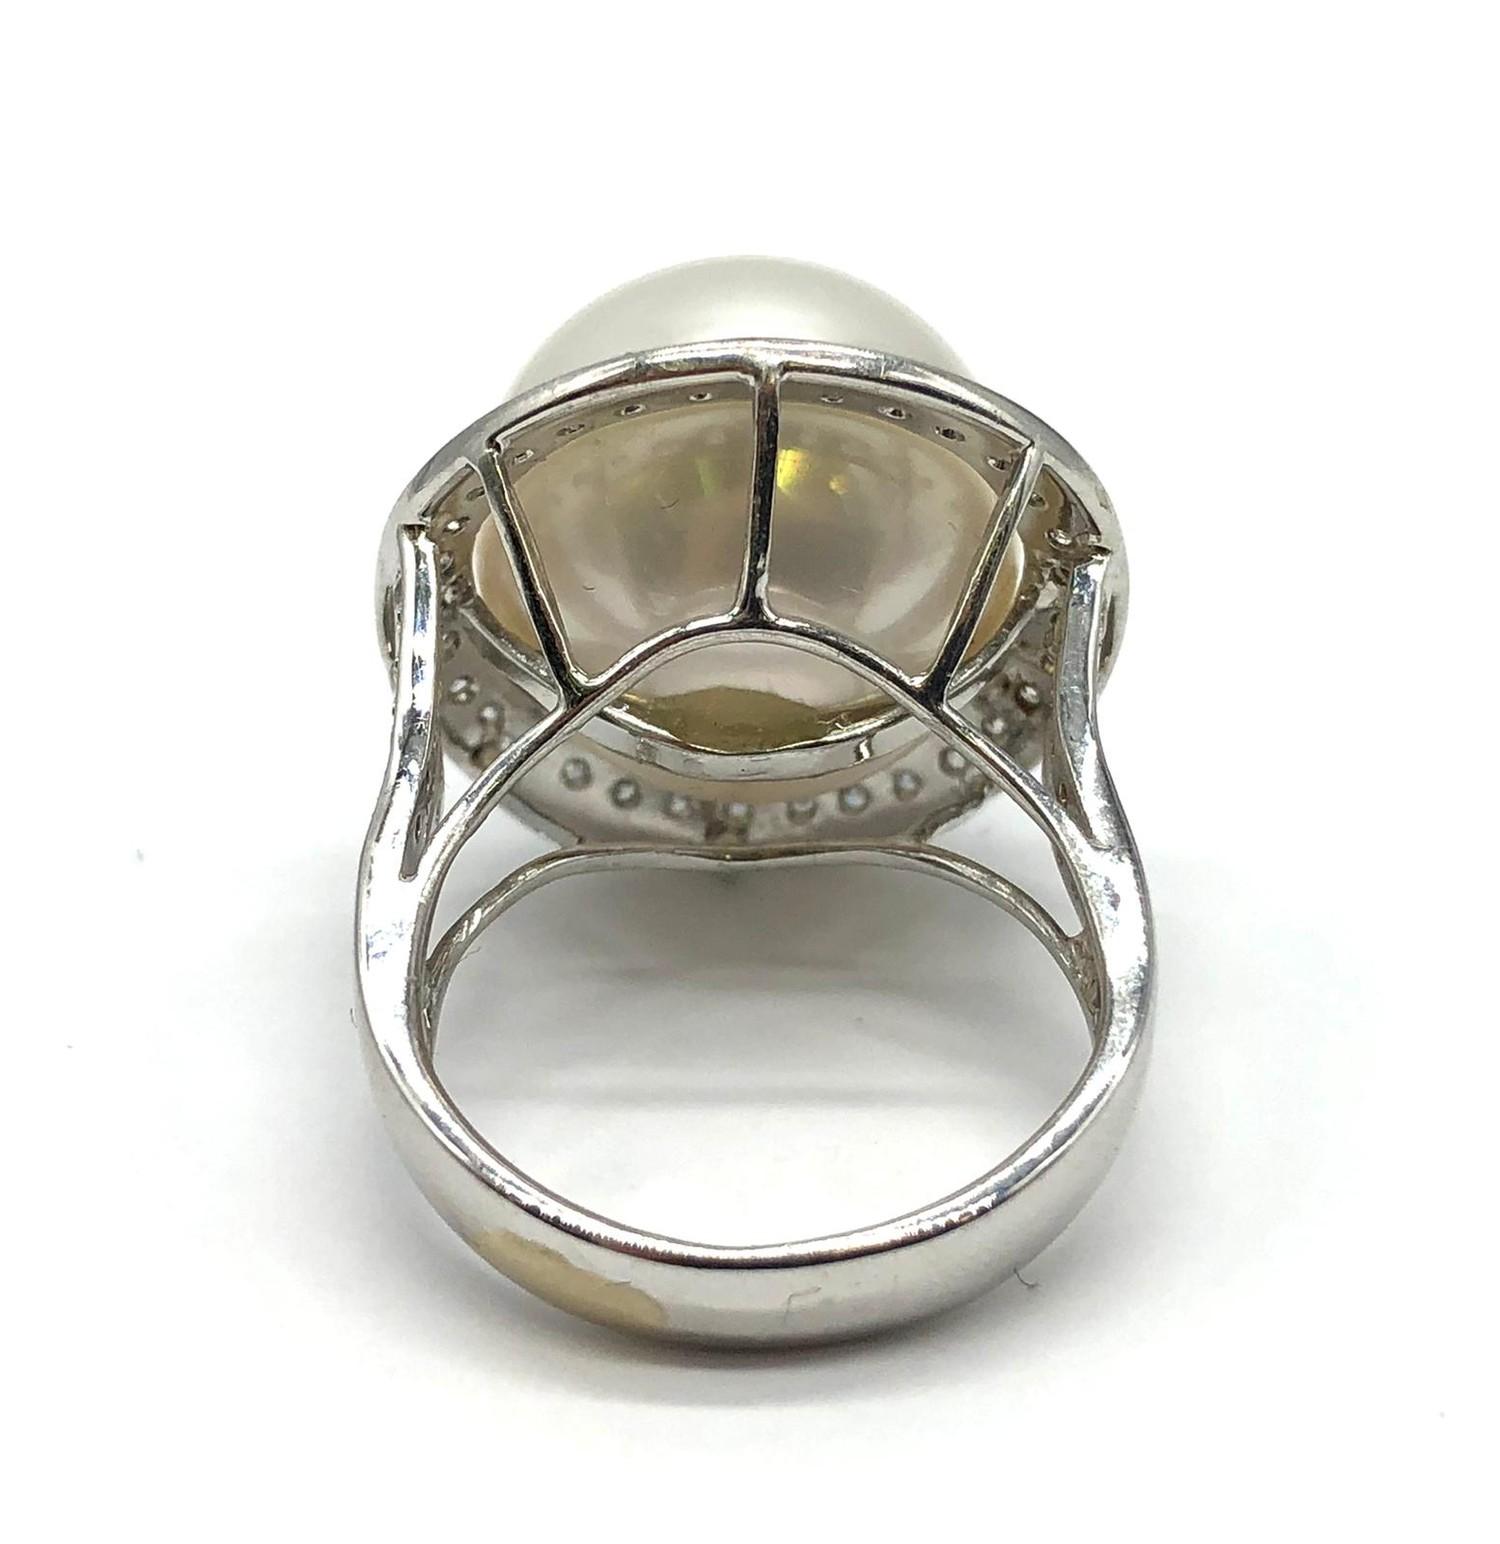 A large Kimoto pearl (17mm diameter) ring set in diamond and 18ct white gold ring, weight 14.43g and - Image 4 of 13